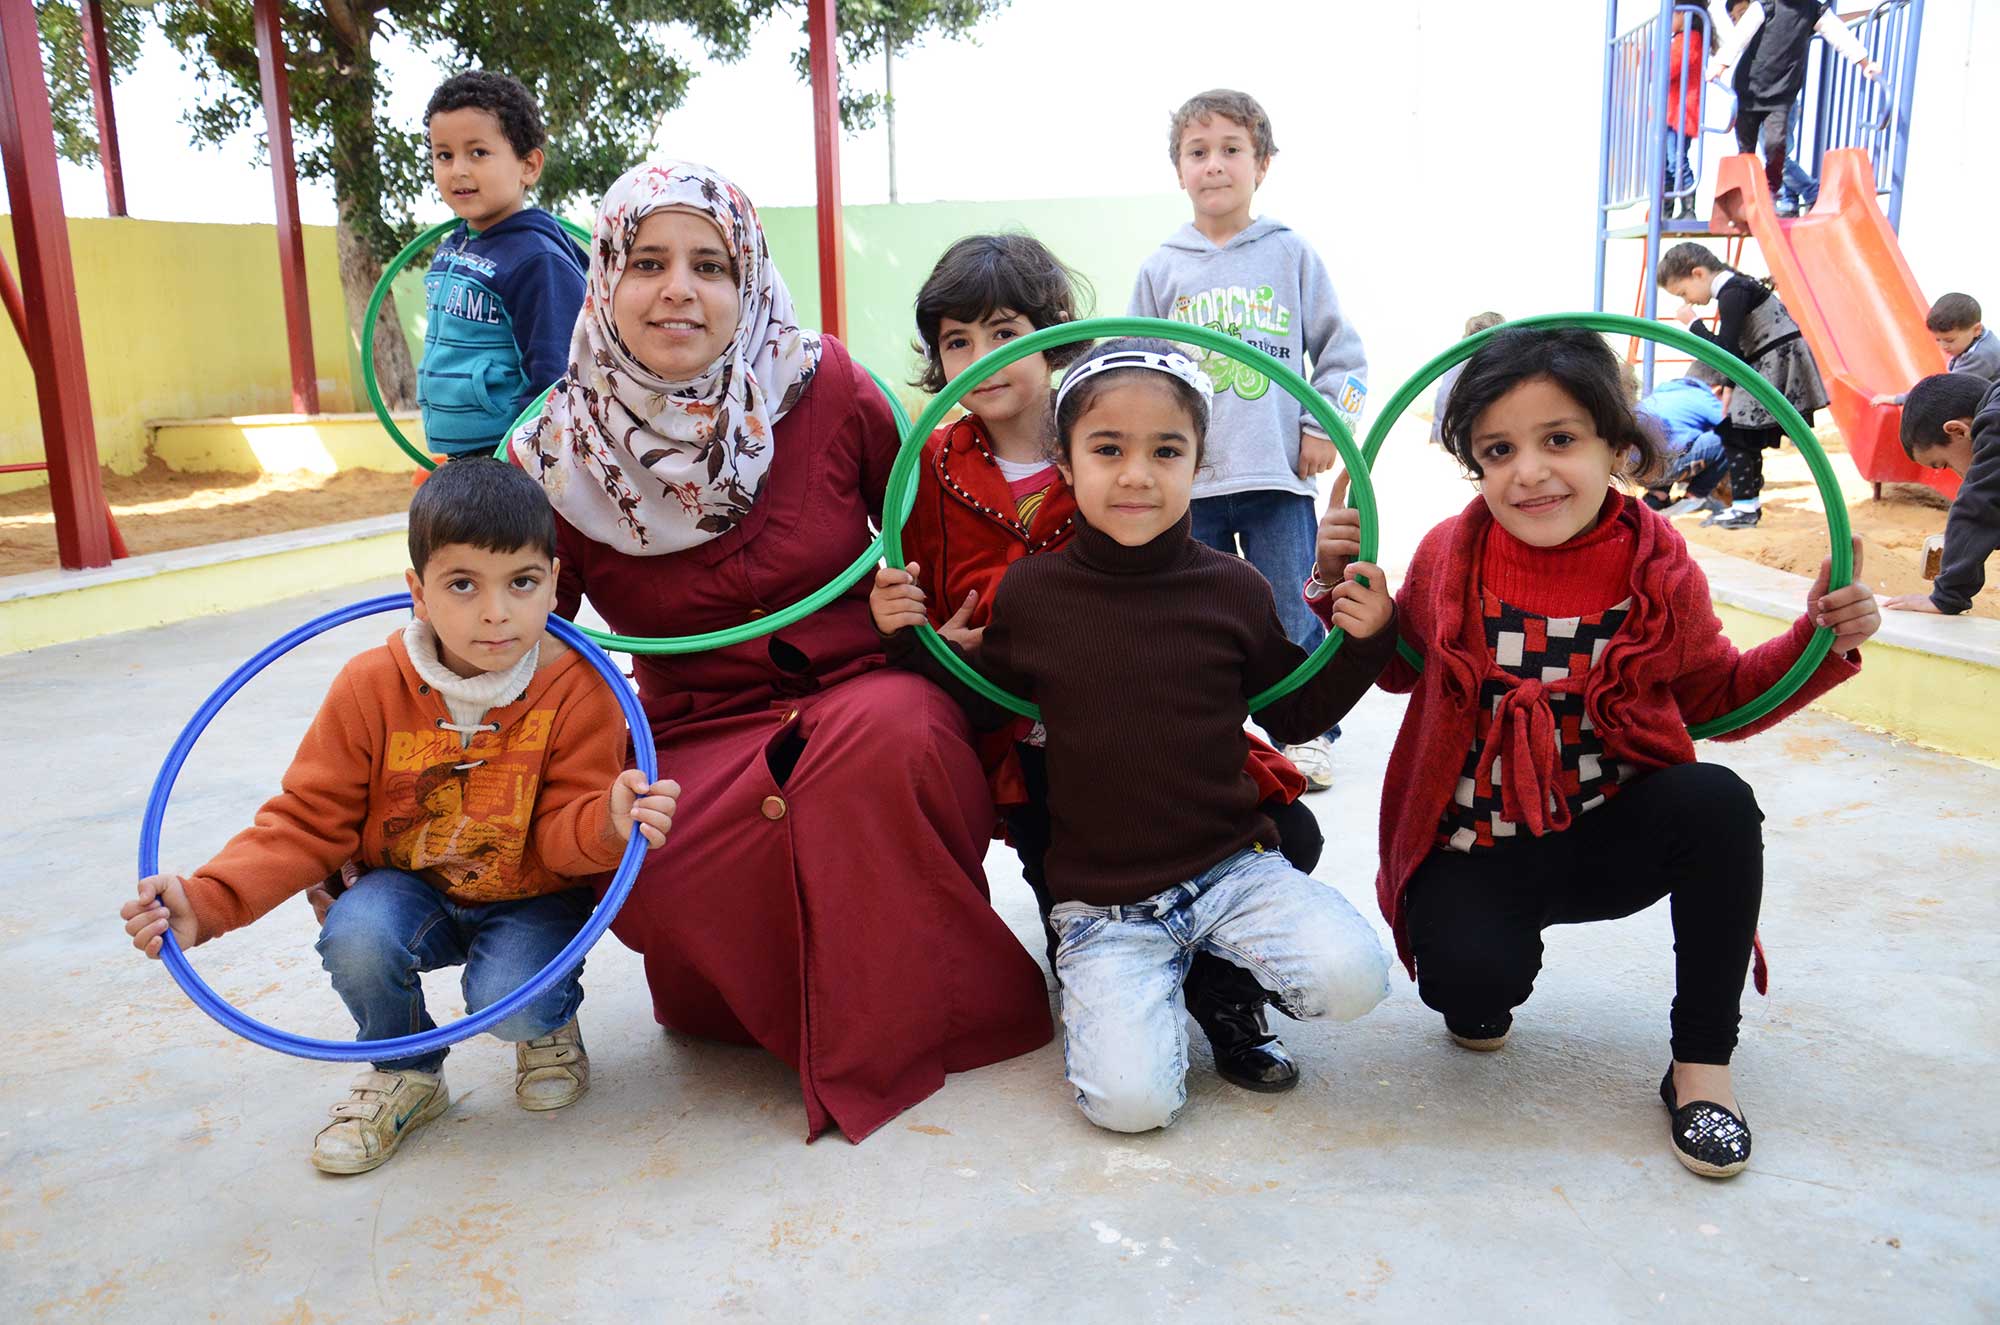 An Anera-trained teacher in Palestine engages her students with interactive learning and play.